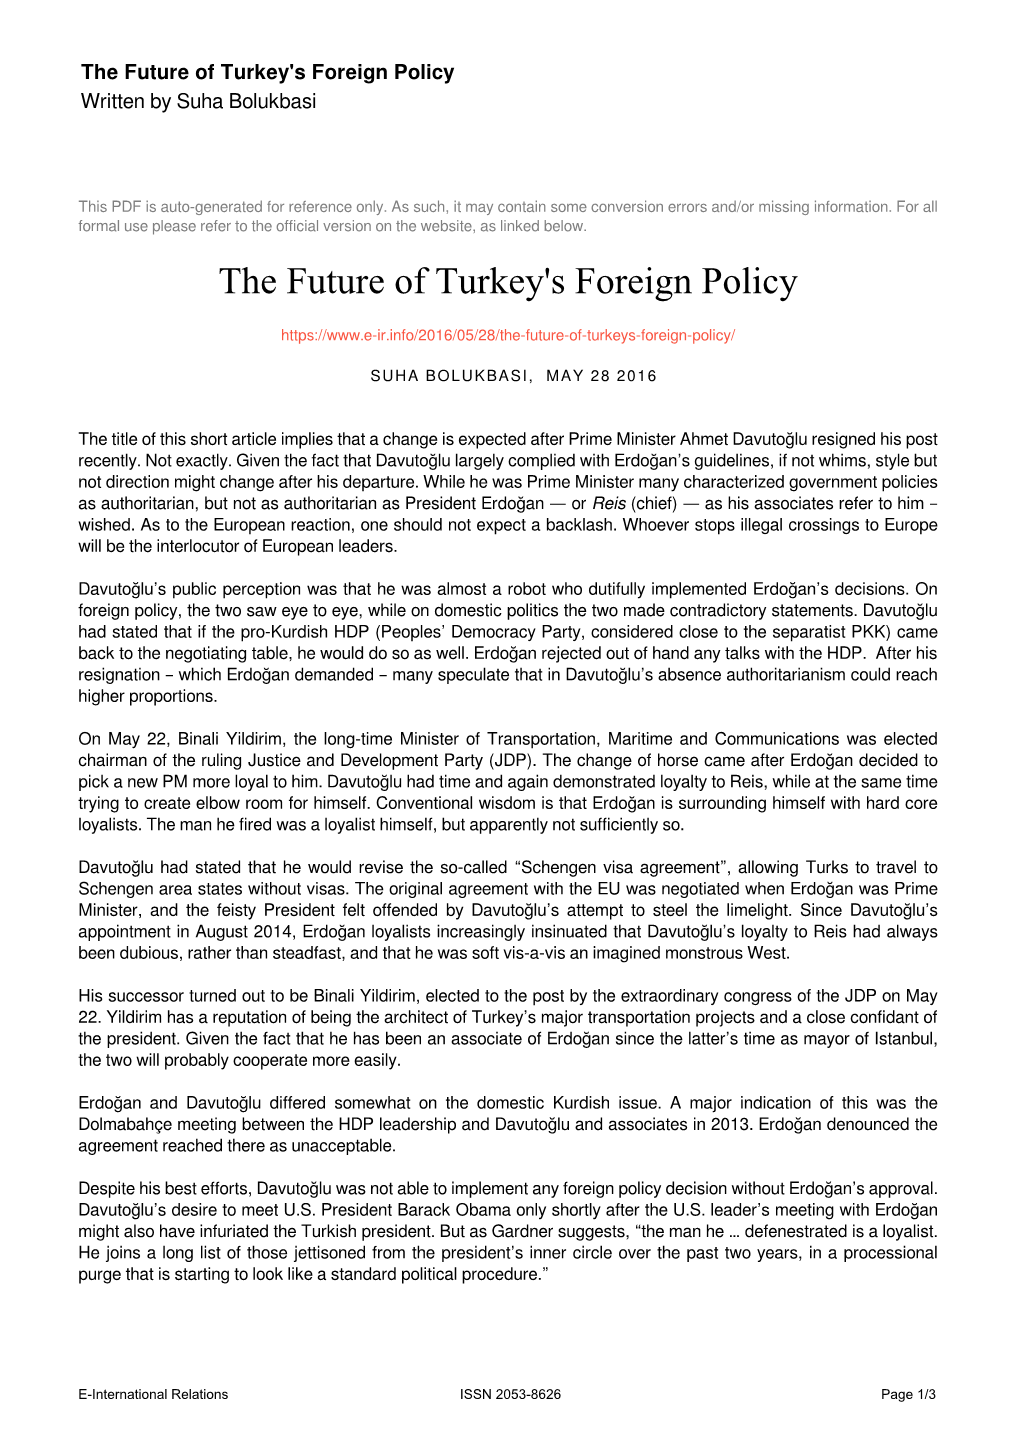 The Future of Turkey's Foreign Policy Written by Suha Bolukbasi